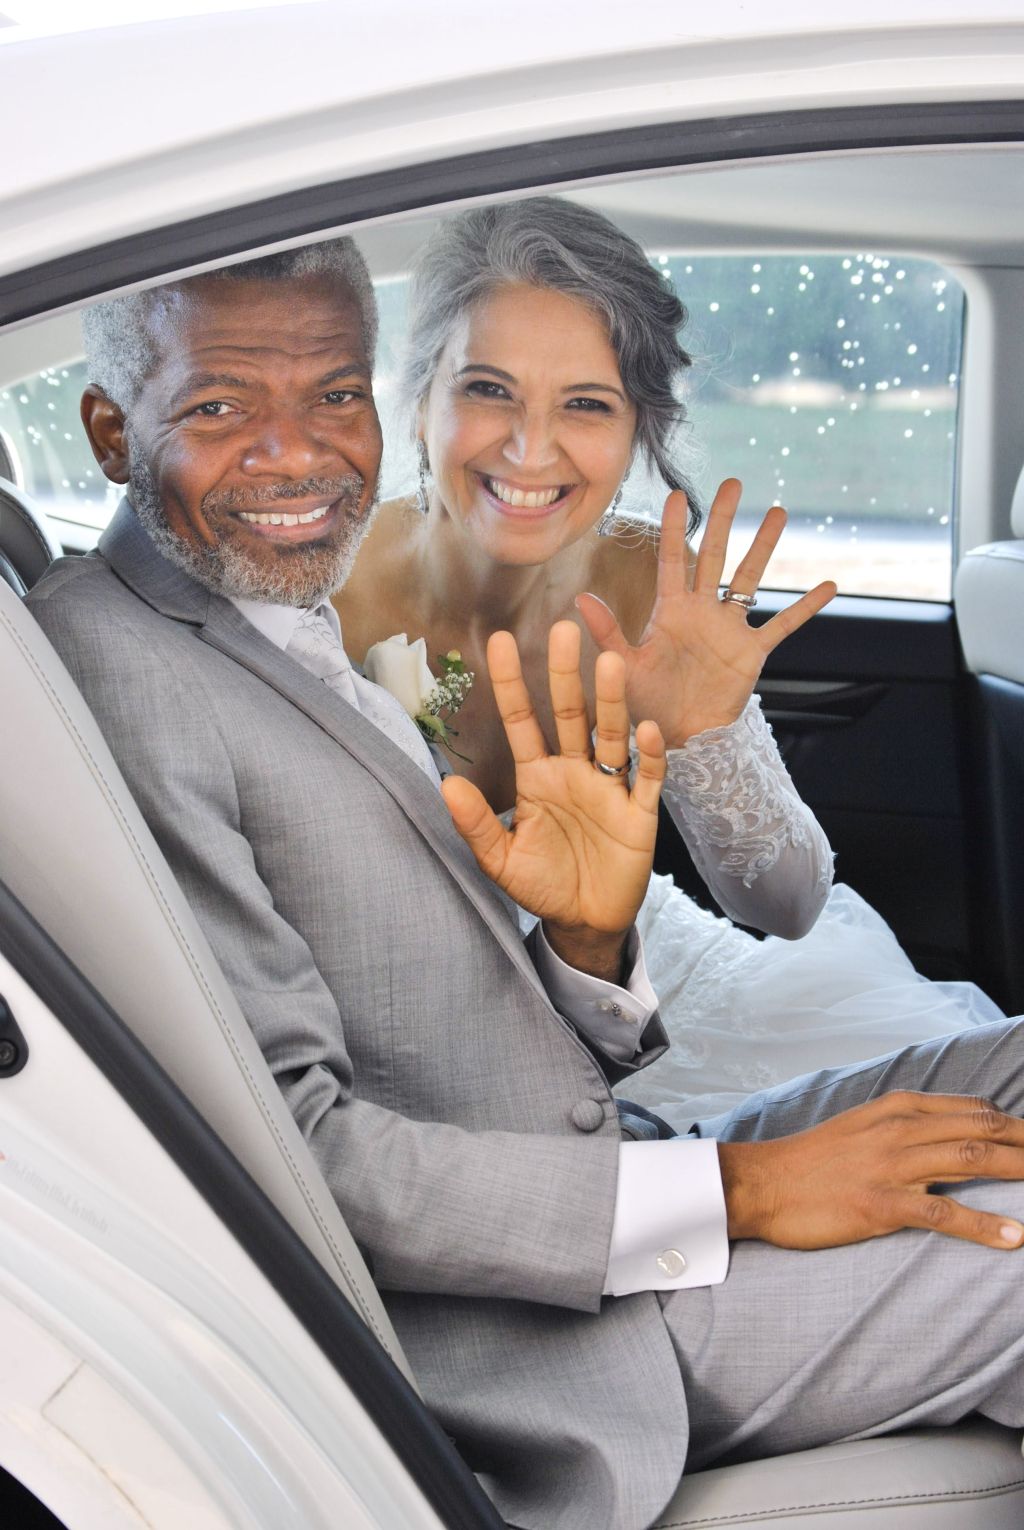 A beautiful Argentinian Christian woman beams with joys while seated in a car next to her new American husband, as both show wave and show off their new wedding rings